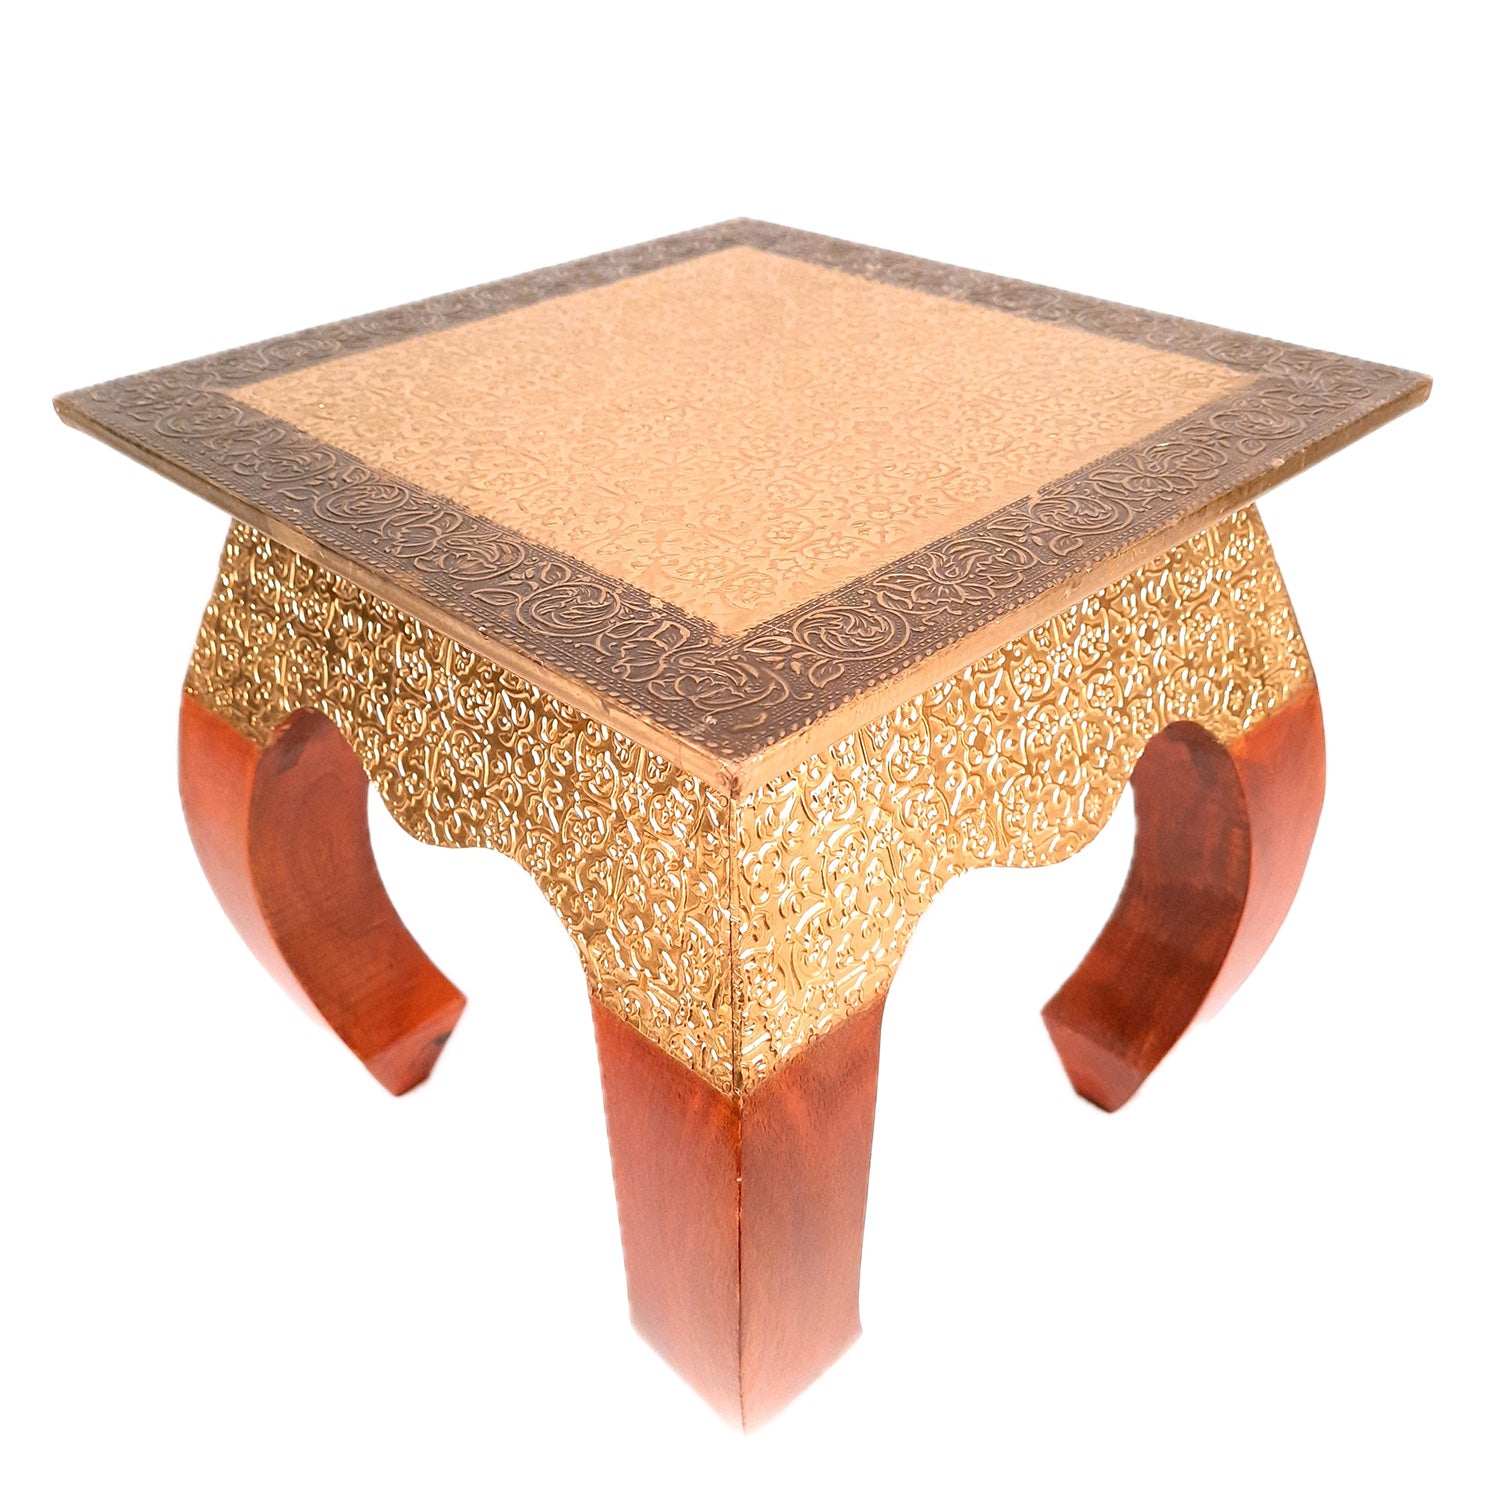 Side Table | Wood & Brass End Tables Cum Stool - for Keeping Lamp, Vases & Plants | Small Stools - for Sitting, Bedside, Home Decor, Corners, Sofa Side Stool, Office & Gifts - 12 Inch